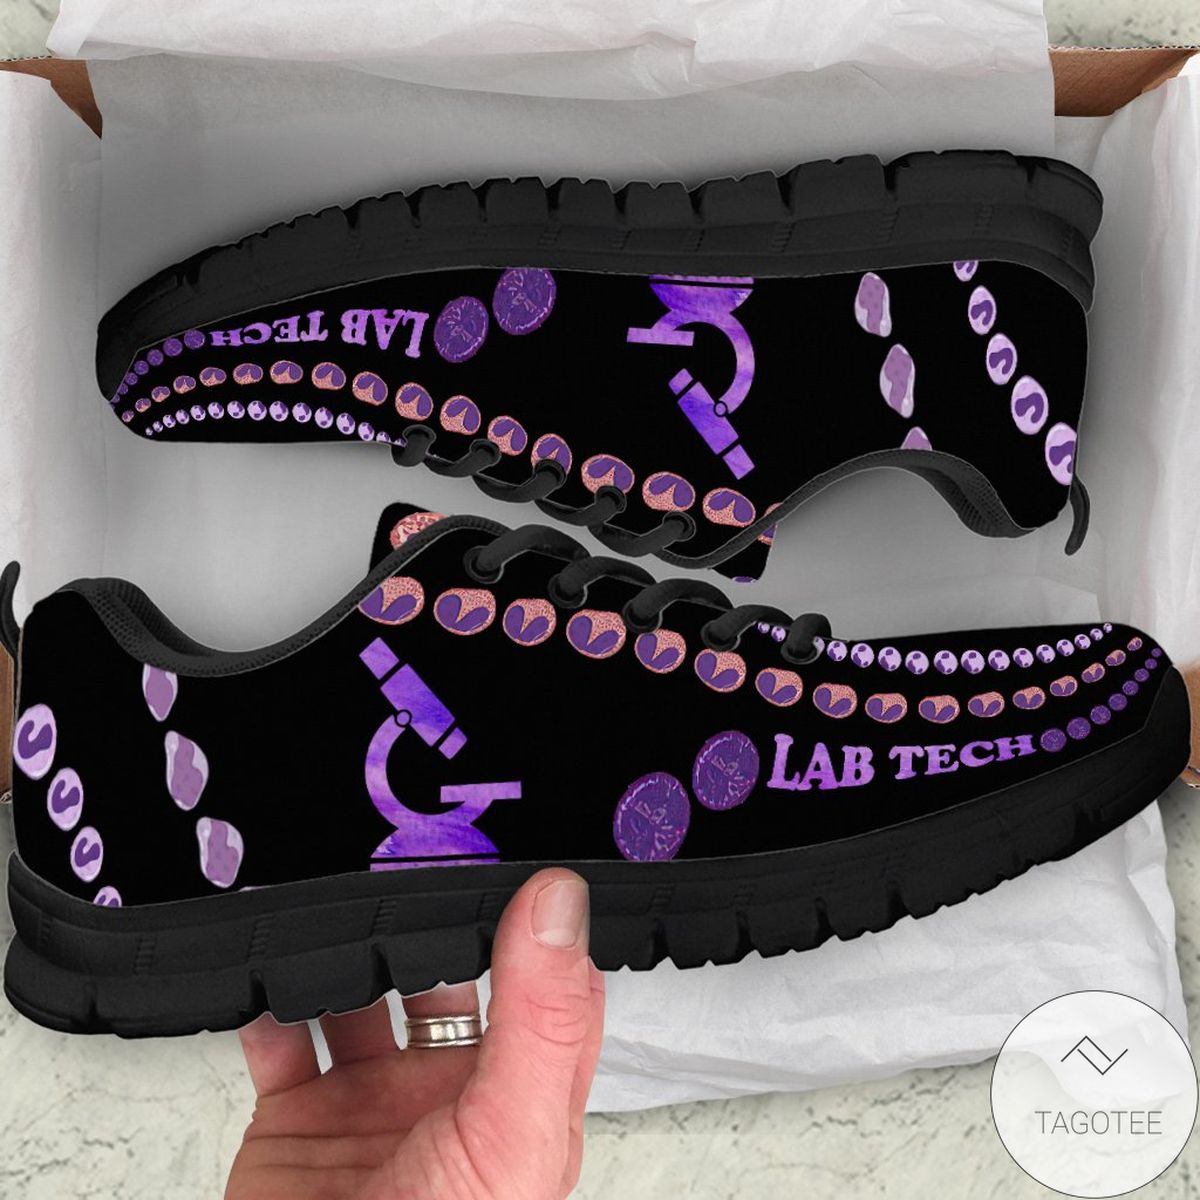 Lab Tech Medical Technologist Sneakers